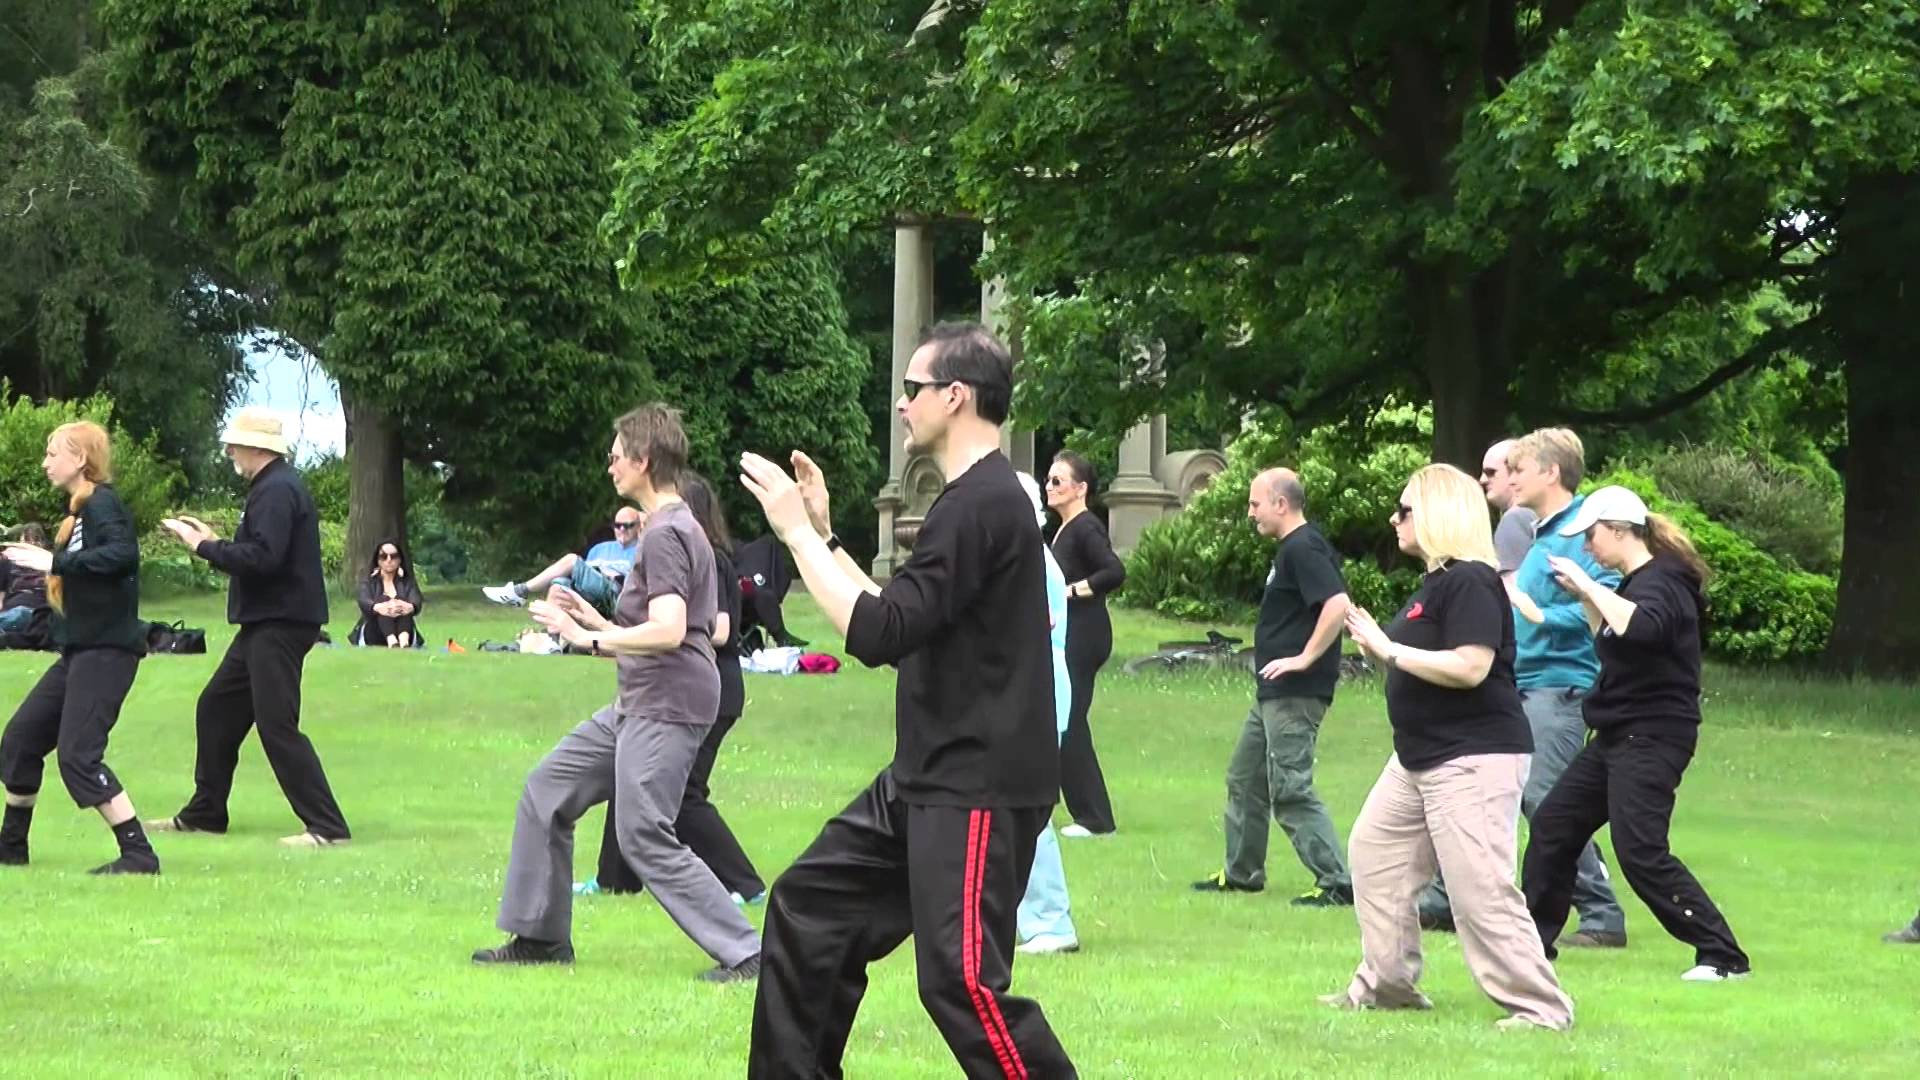 Tai Chi in the park set for June, July